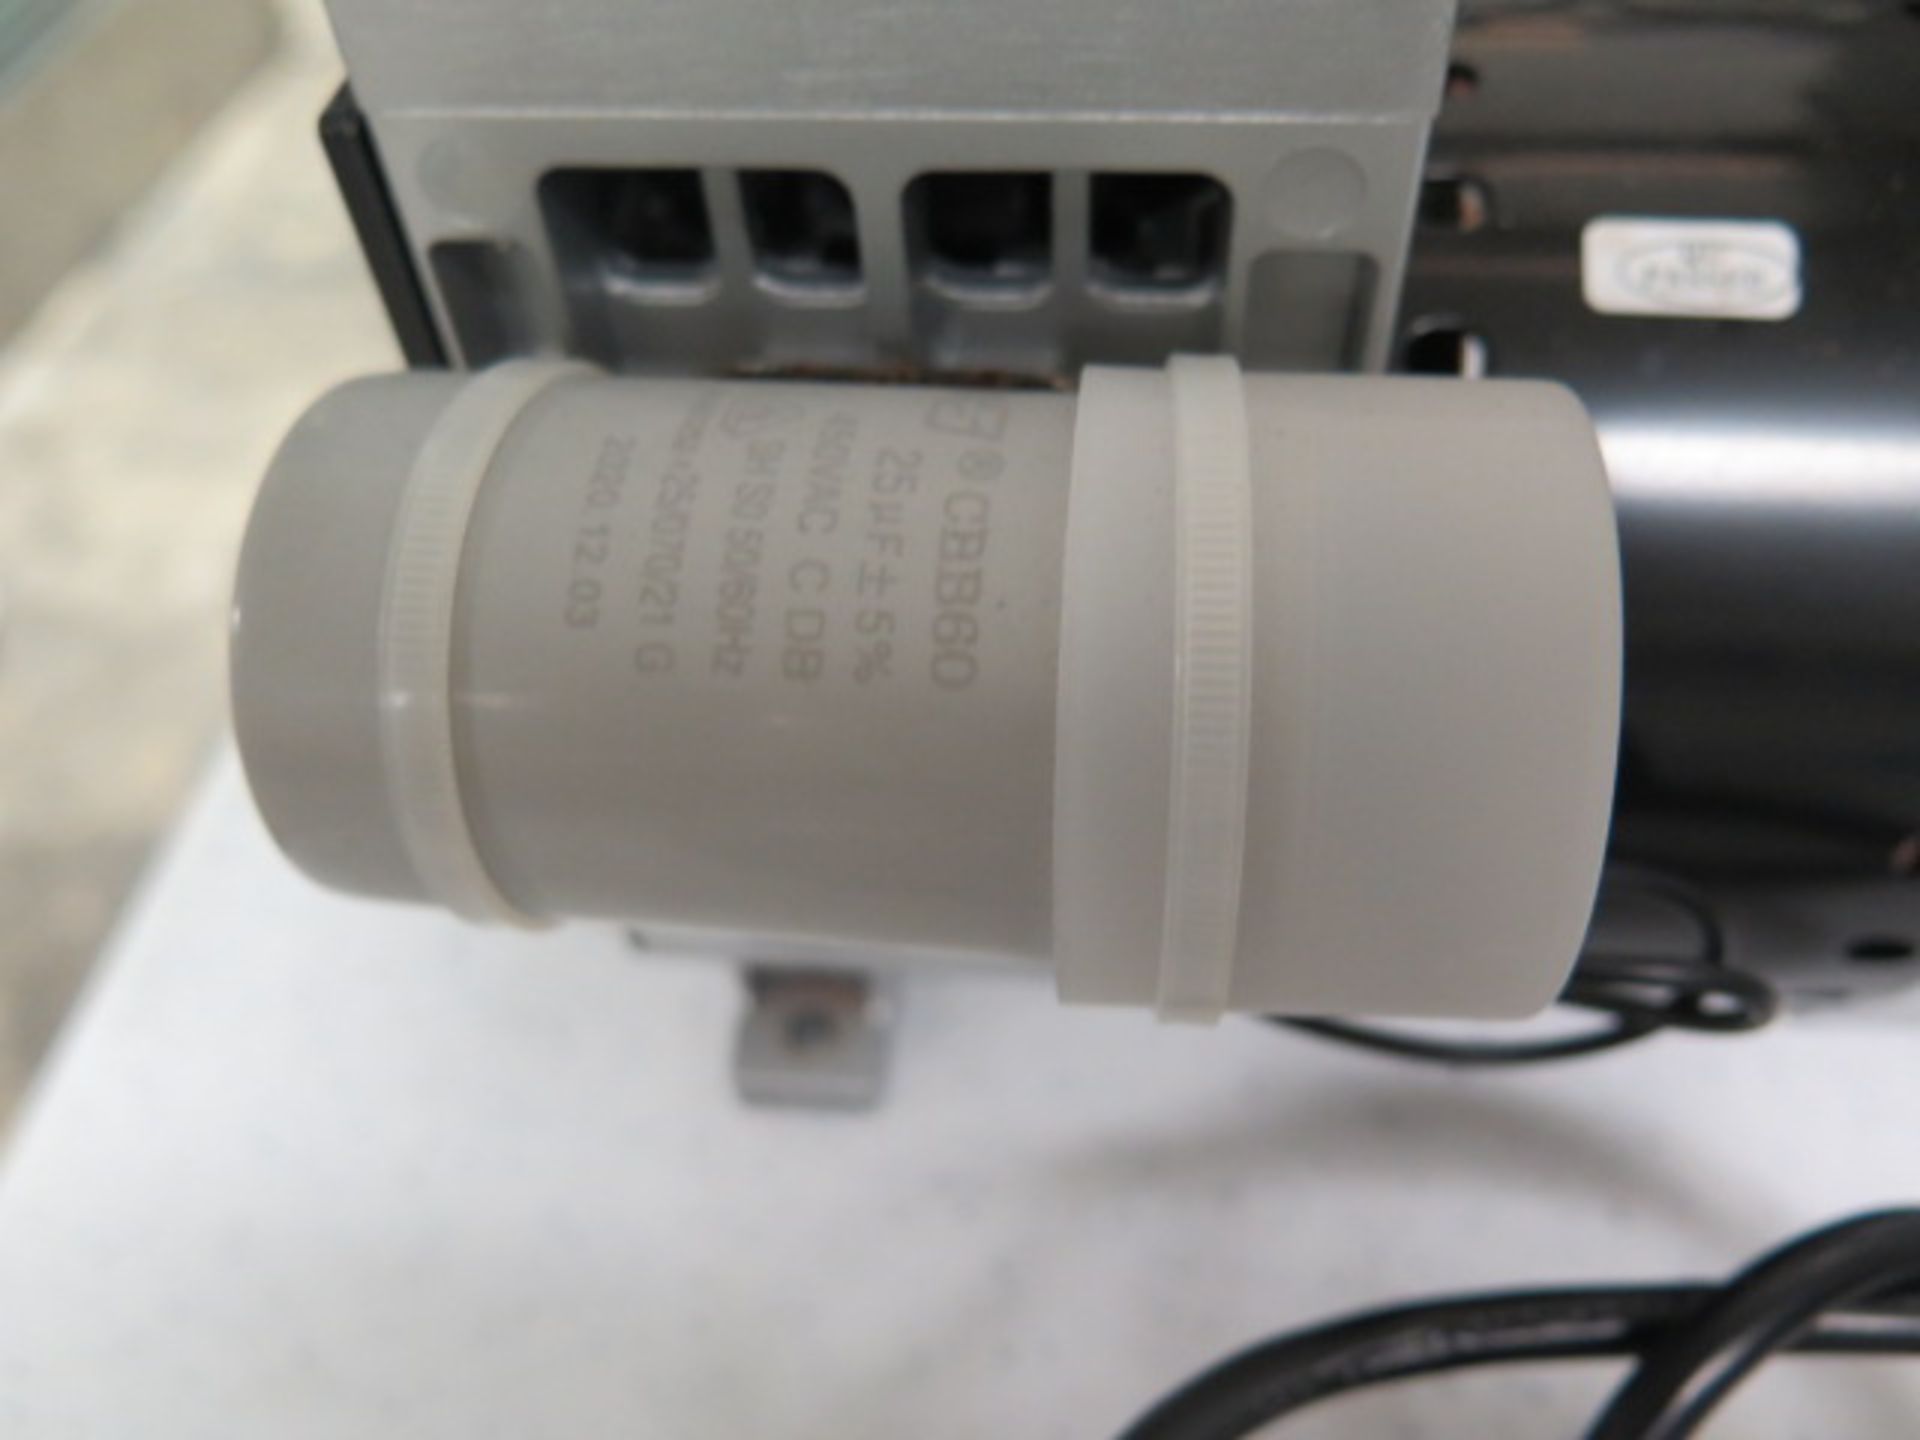 Airtech HP-200V 80 torr Vacuum Pumps (2) 200-240V (SOLD AS-IS - NO WARRANTY) - Image 5 of 6